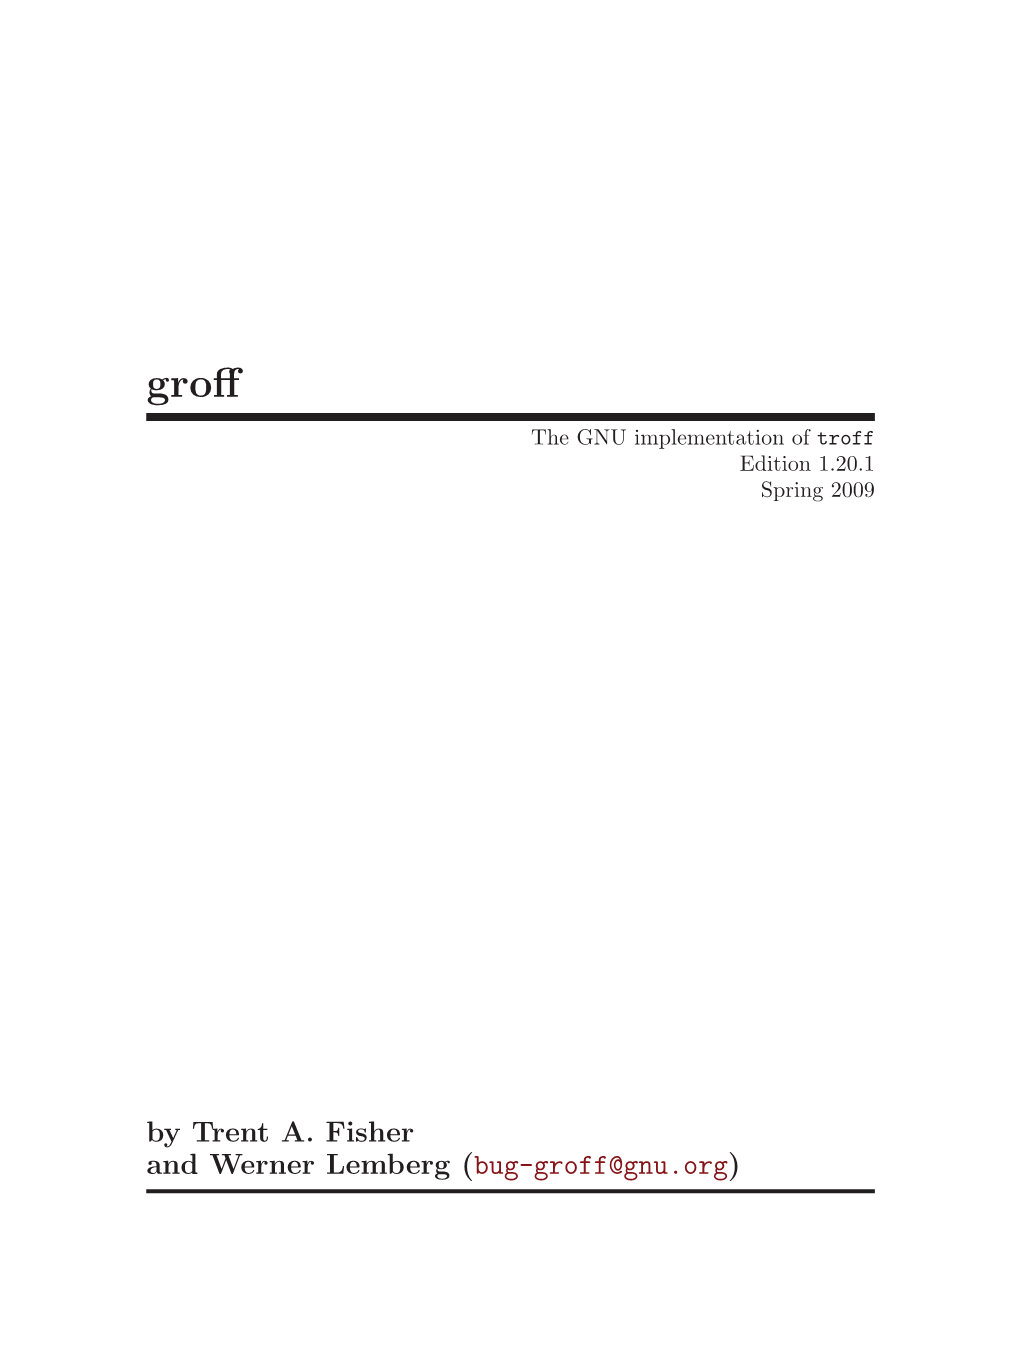 By Trent A. Fisher and Werner Lemberg (Bug-Groff@Gnu.Org) This Manual Documents GNU Troff Version 1.20.1